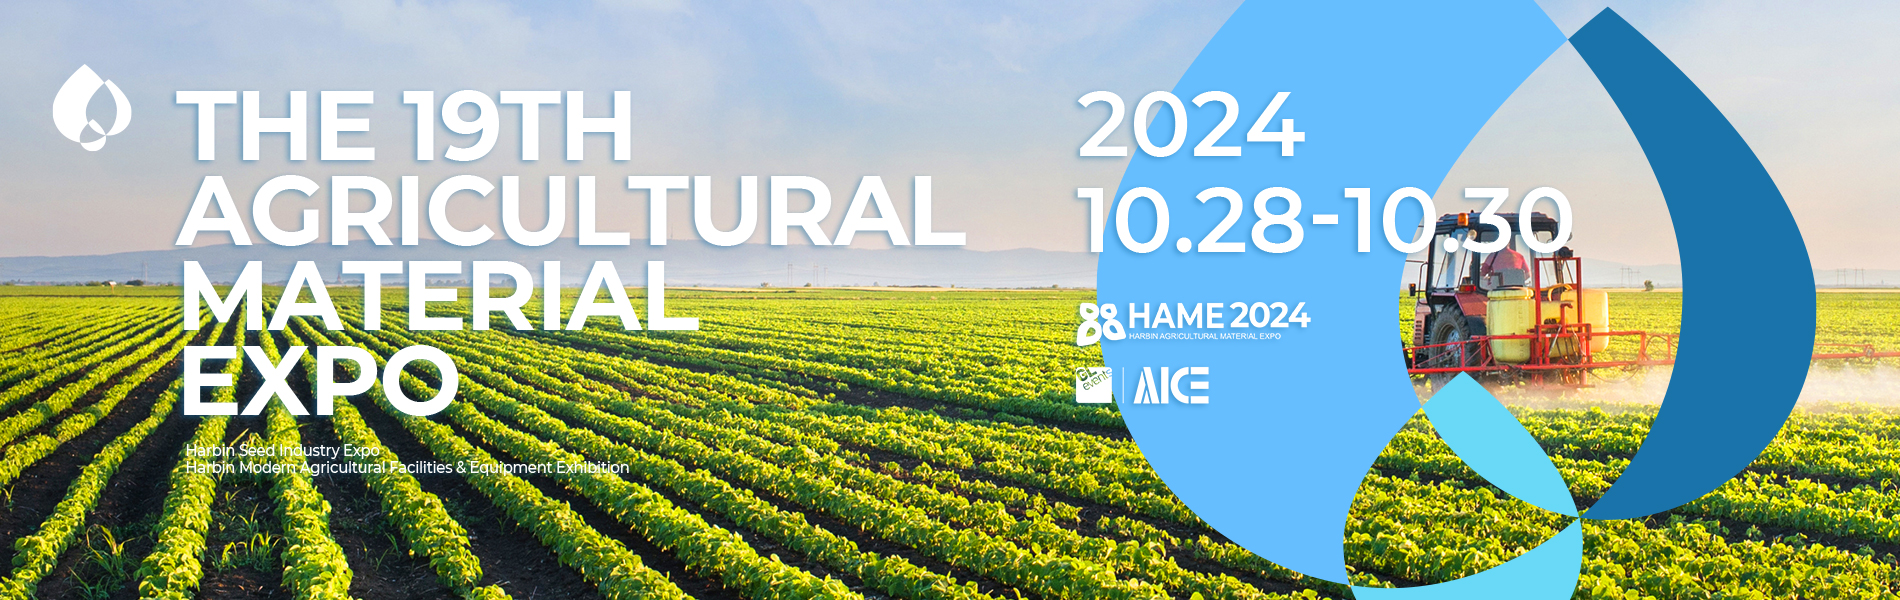 2024 Harbin Agricultural Material Expo